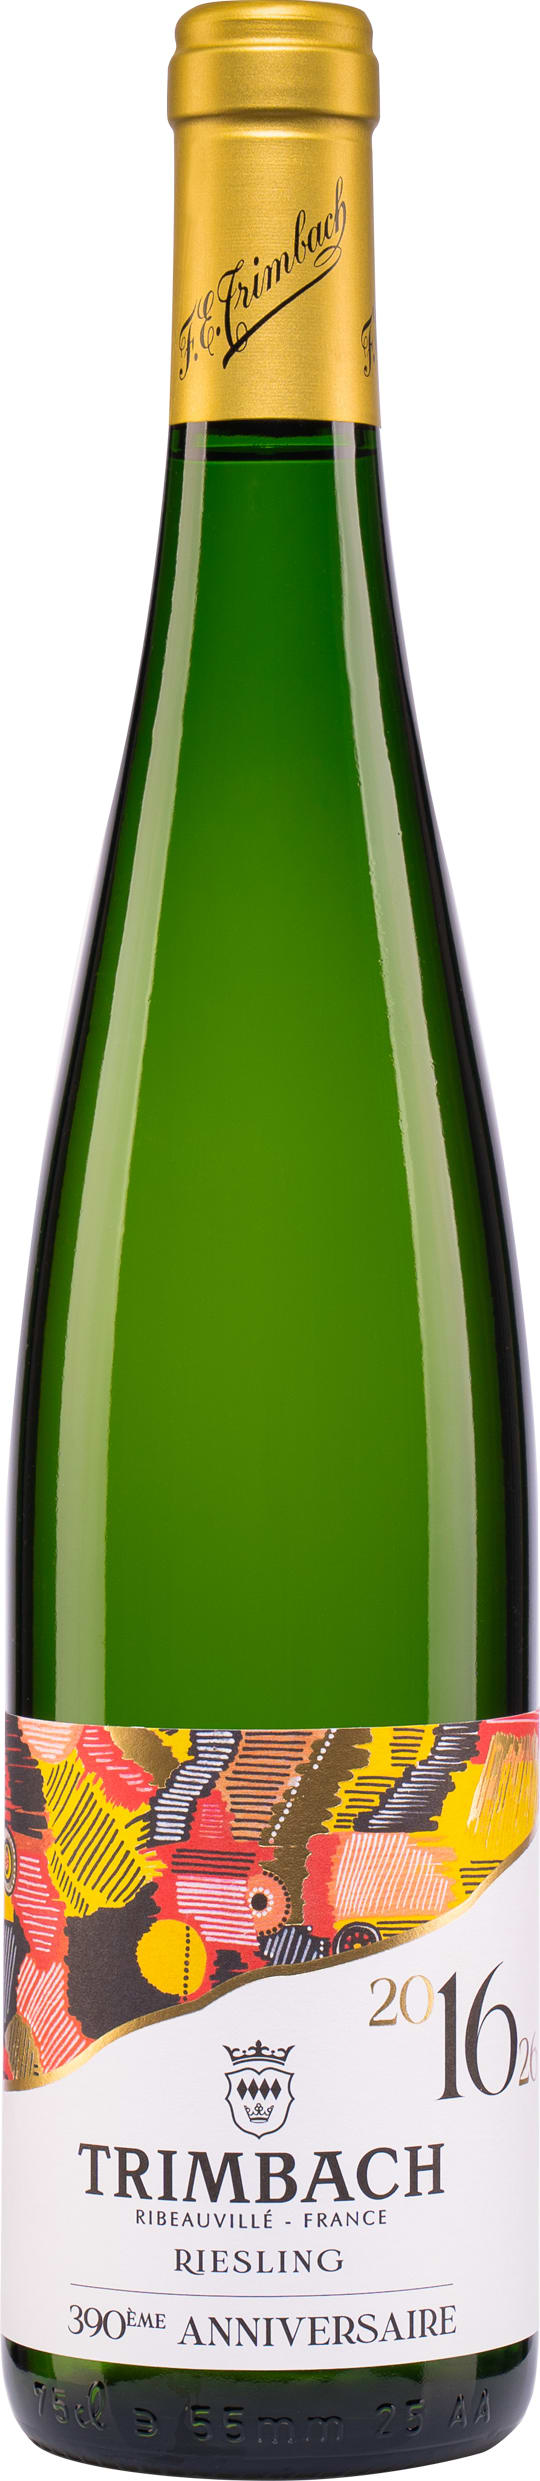 Trimbach Riesling Cuvee 390th Birthday 2016 75cl - Buy Trimbach Wines from GREAT WINES DIRECT wine shop